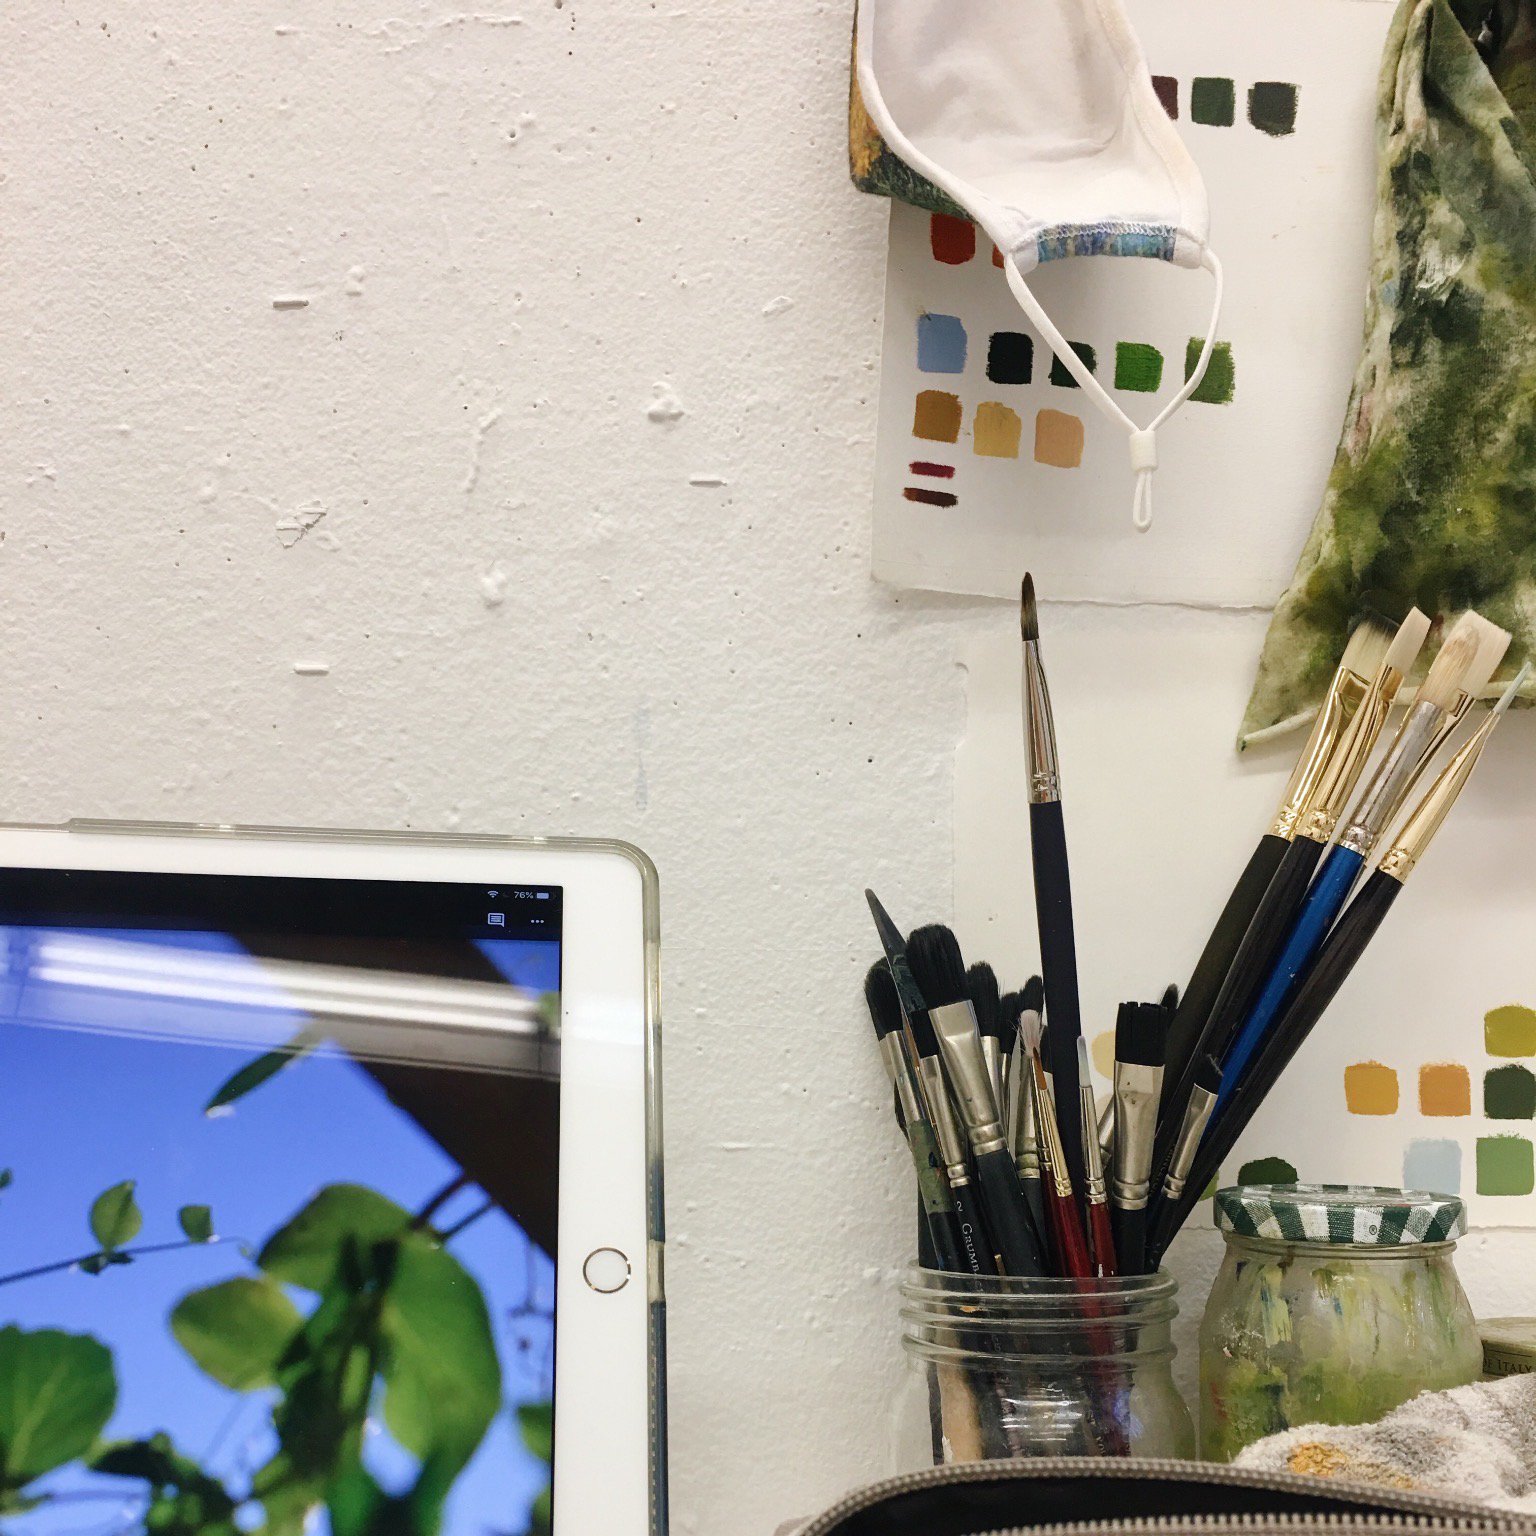 a photo of objects on a desk against a white wall, a corner of an ipad with the picture of a pea plant on it, a jar full of paint brushes next to it, a mask and a piece of paper with color swatches hang on the wall.